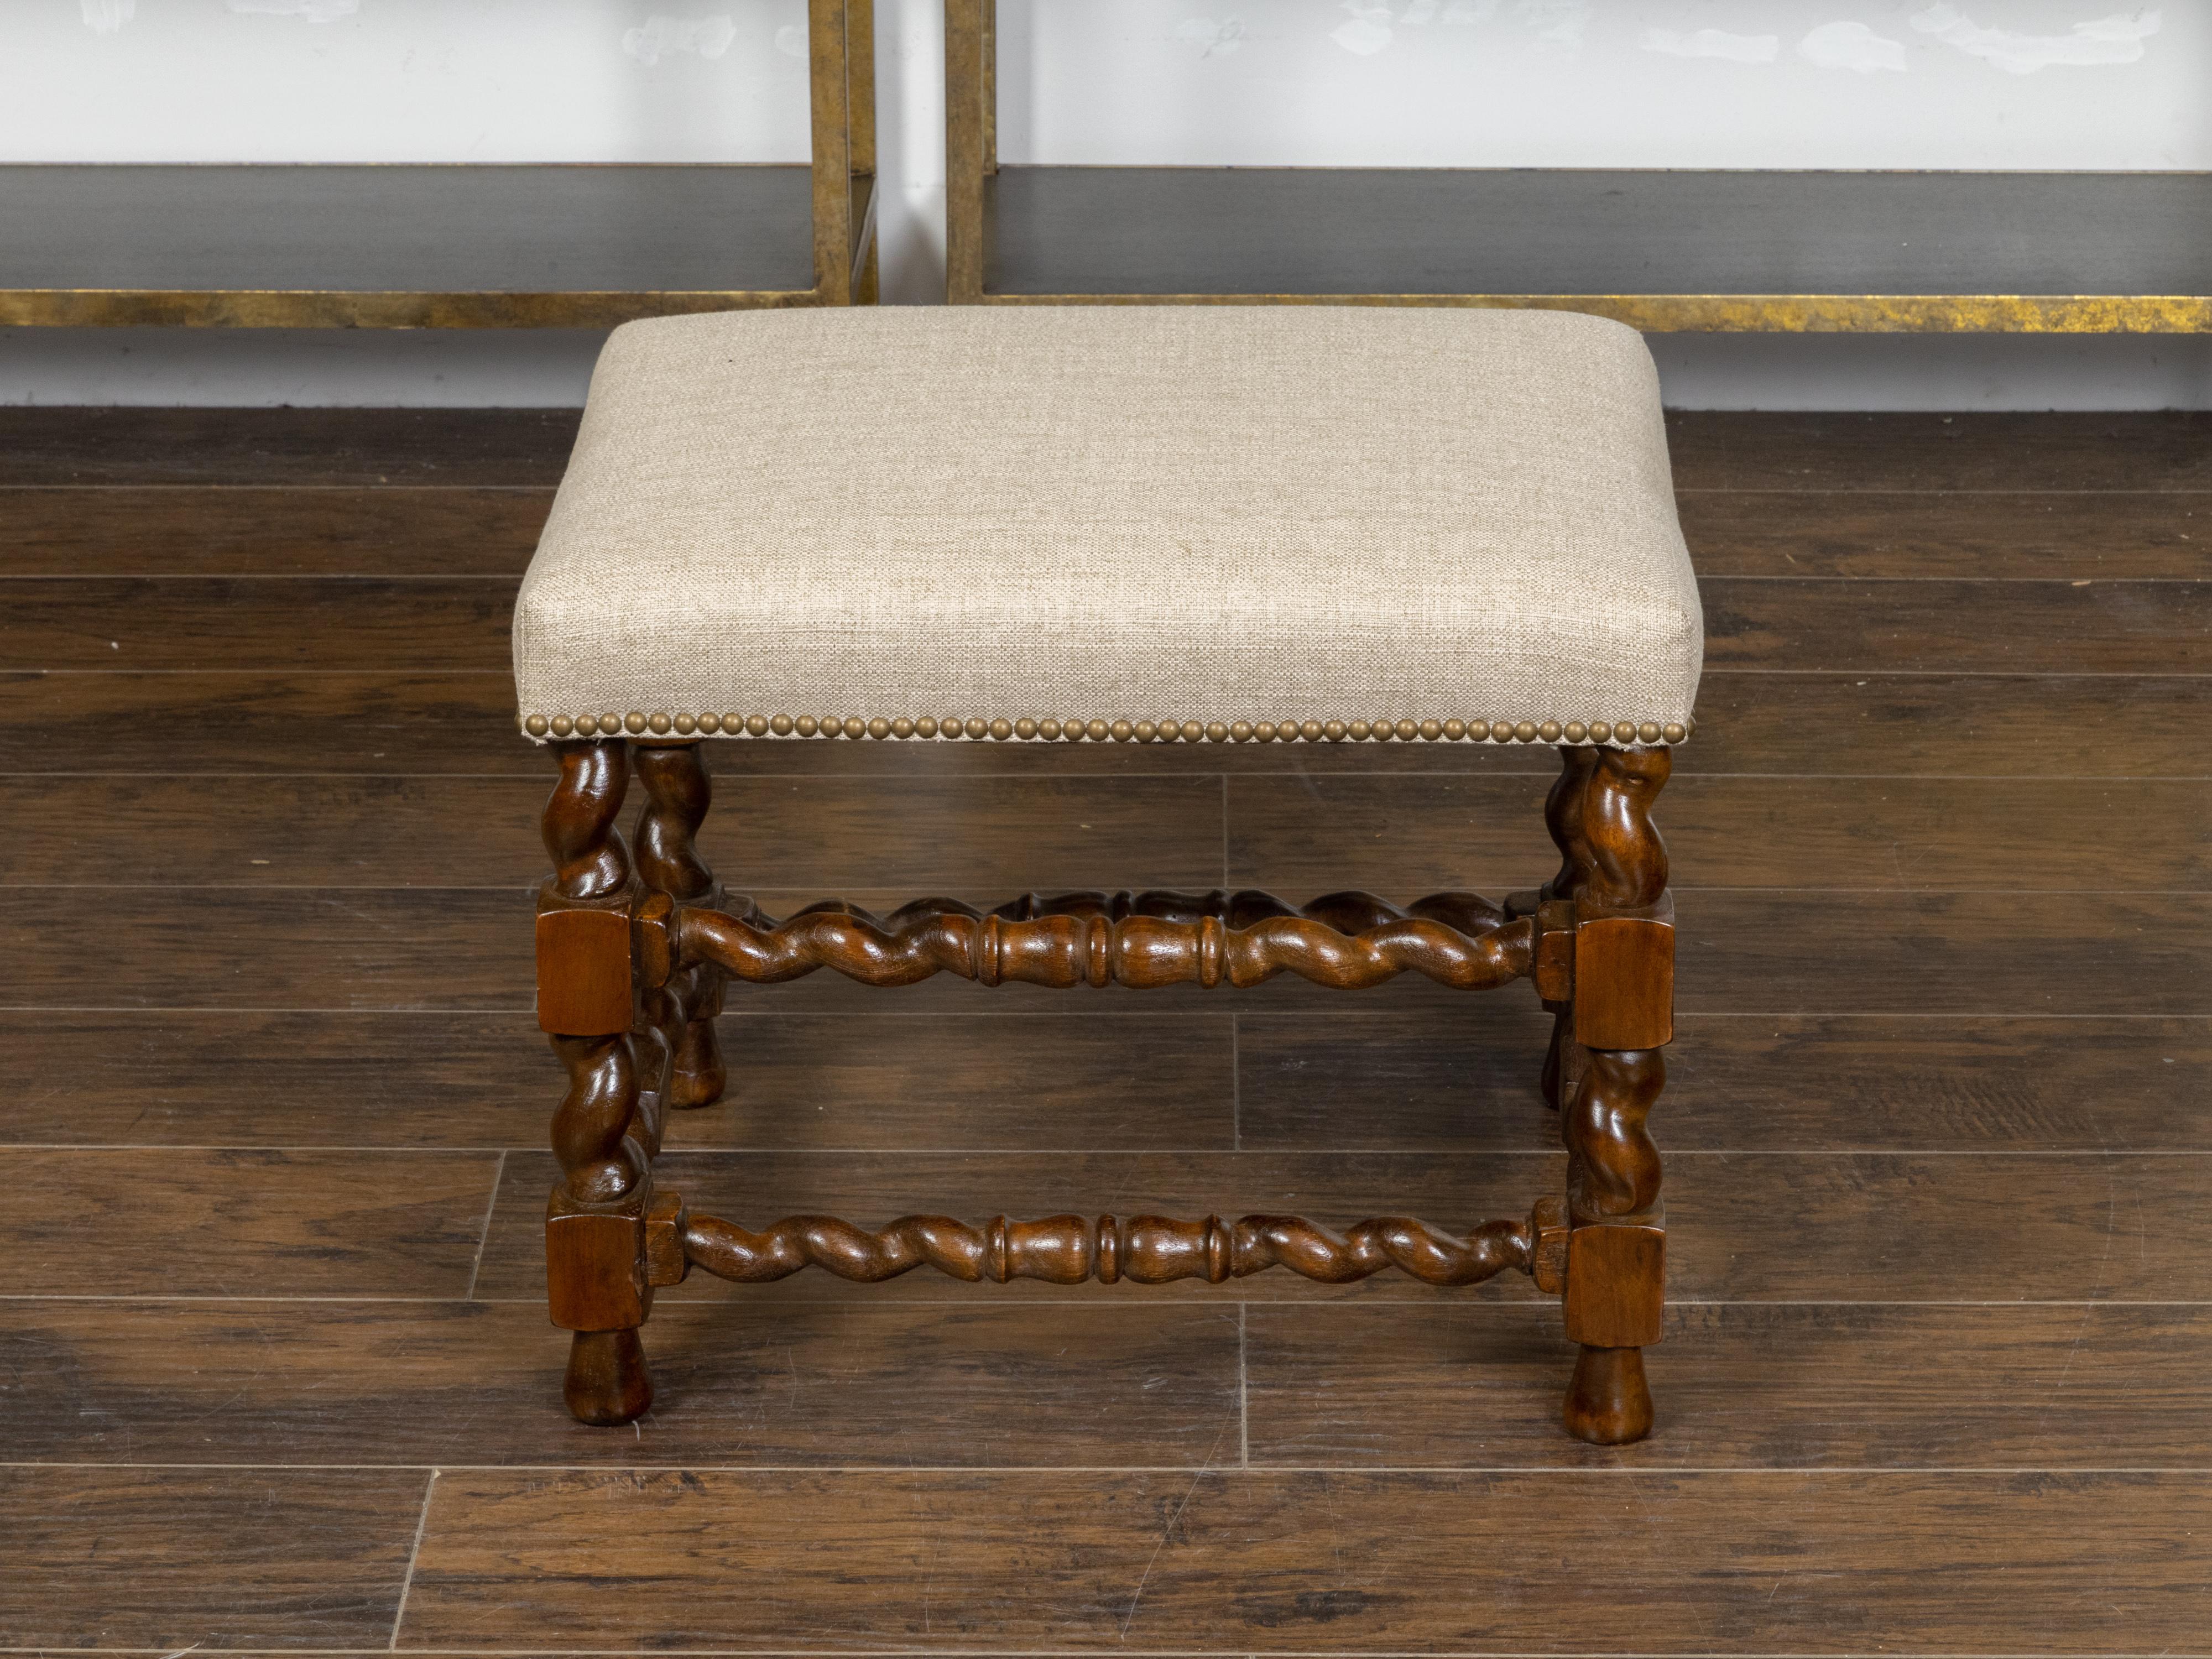 An English oak stool from the 19th century, with barley twist base, rectangular block joints and new linen upholstery and brass nailhead trim. Created in England during the 19th century, this oak stool features a rectangular seat newly recovered